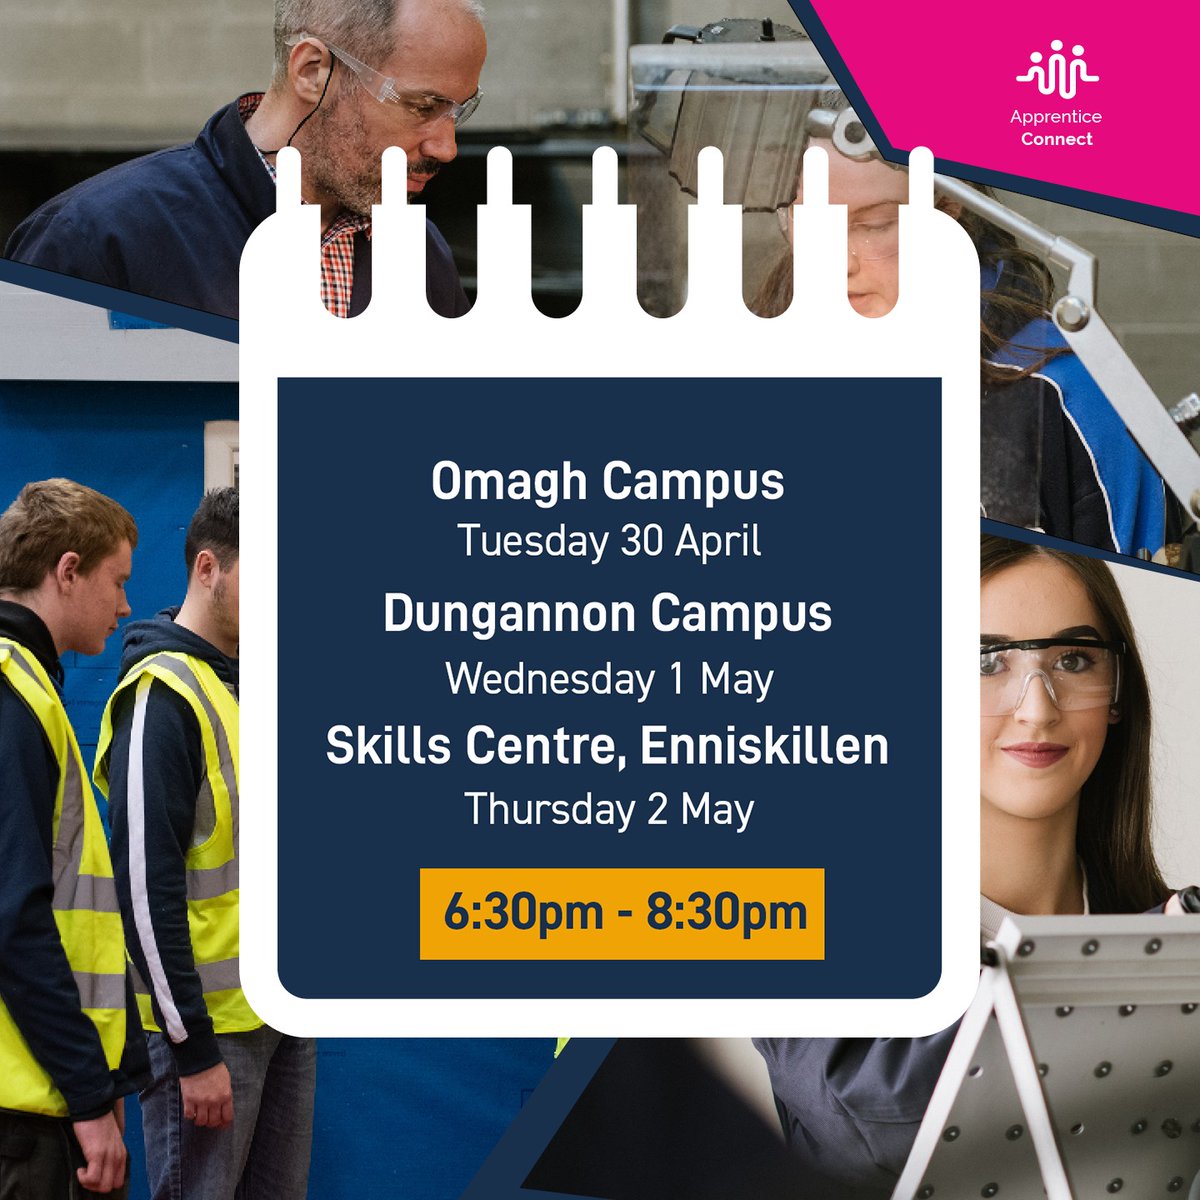 The college works with prospective apprentices and local employers seeking to match talent with apprenticeship opportunities through Apprentice Connect. Read the full story👇 pulse.ly/5epjsbf3vh Apprentice Connect Events - Register today: pulse.ly/14atfebl0v